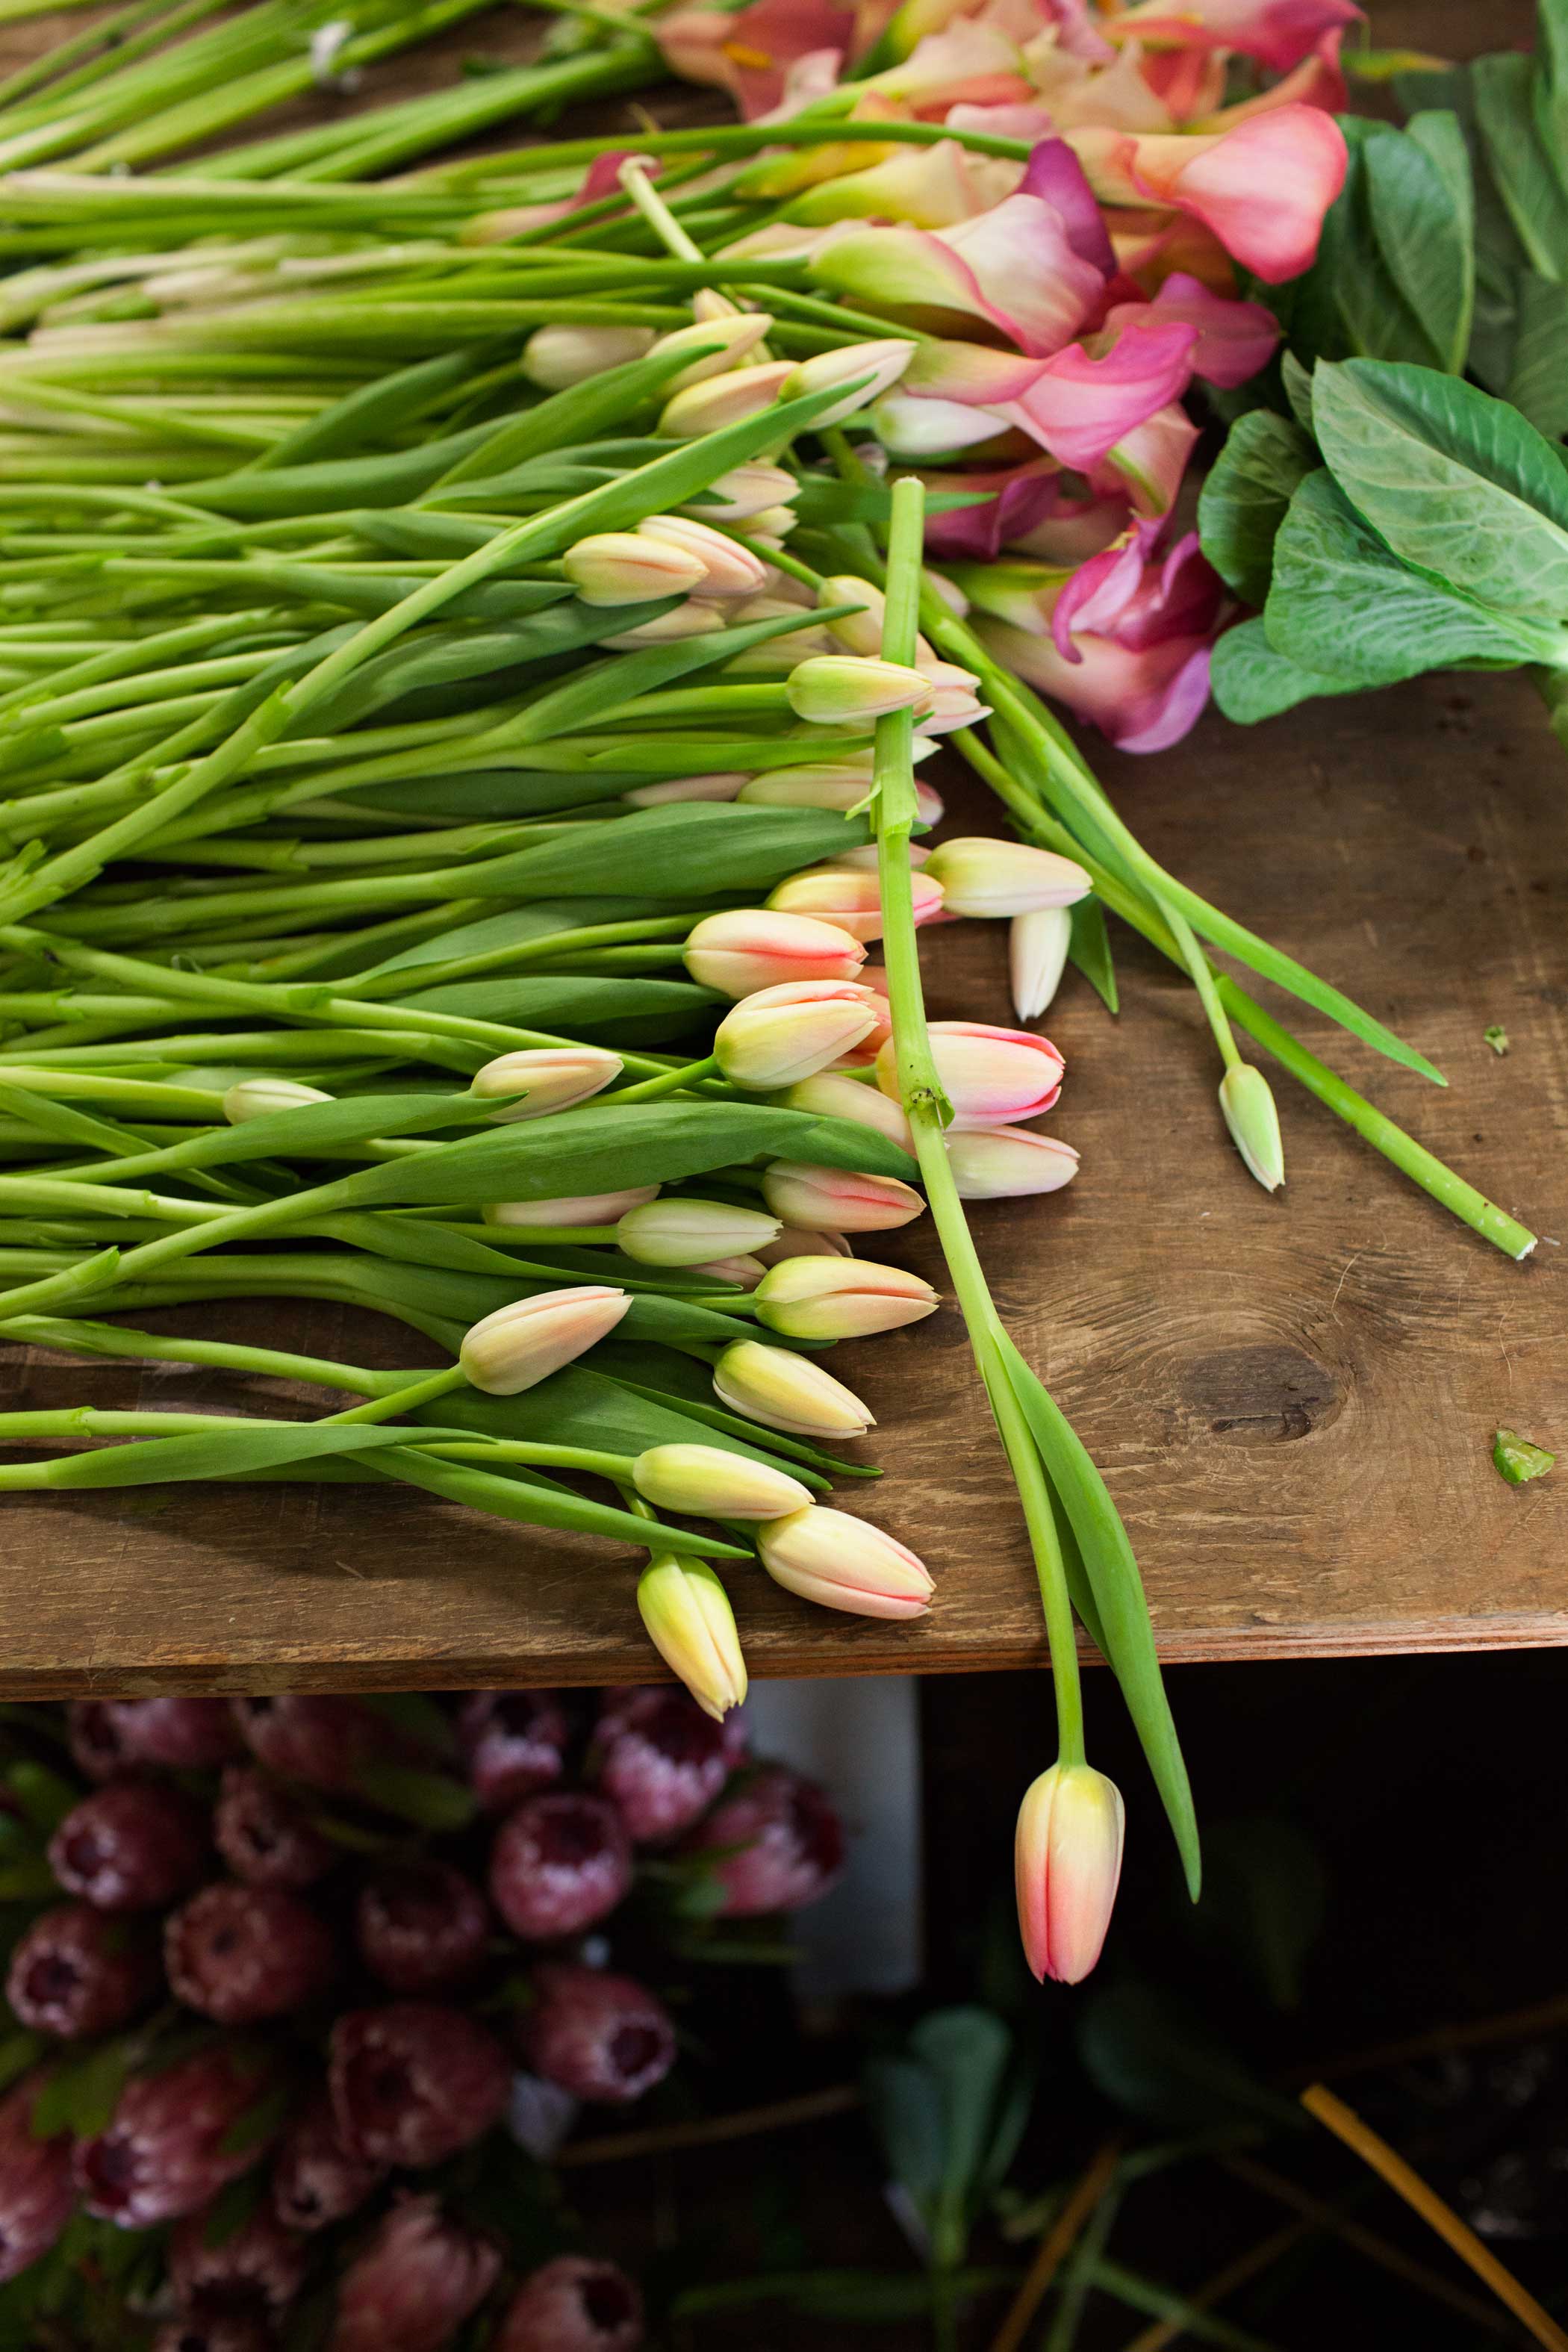 Tulips lie on the table before being added to arrangements.